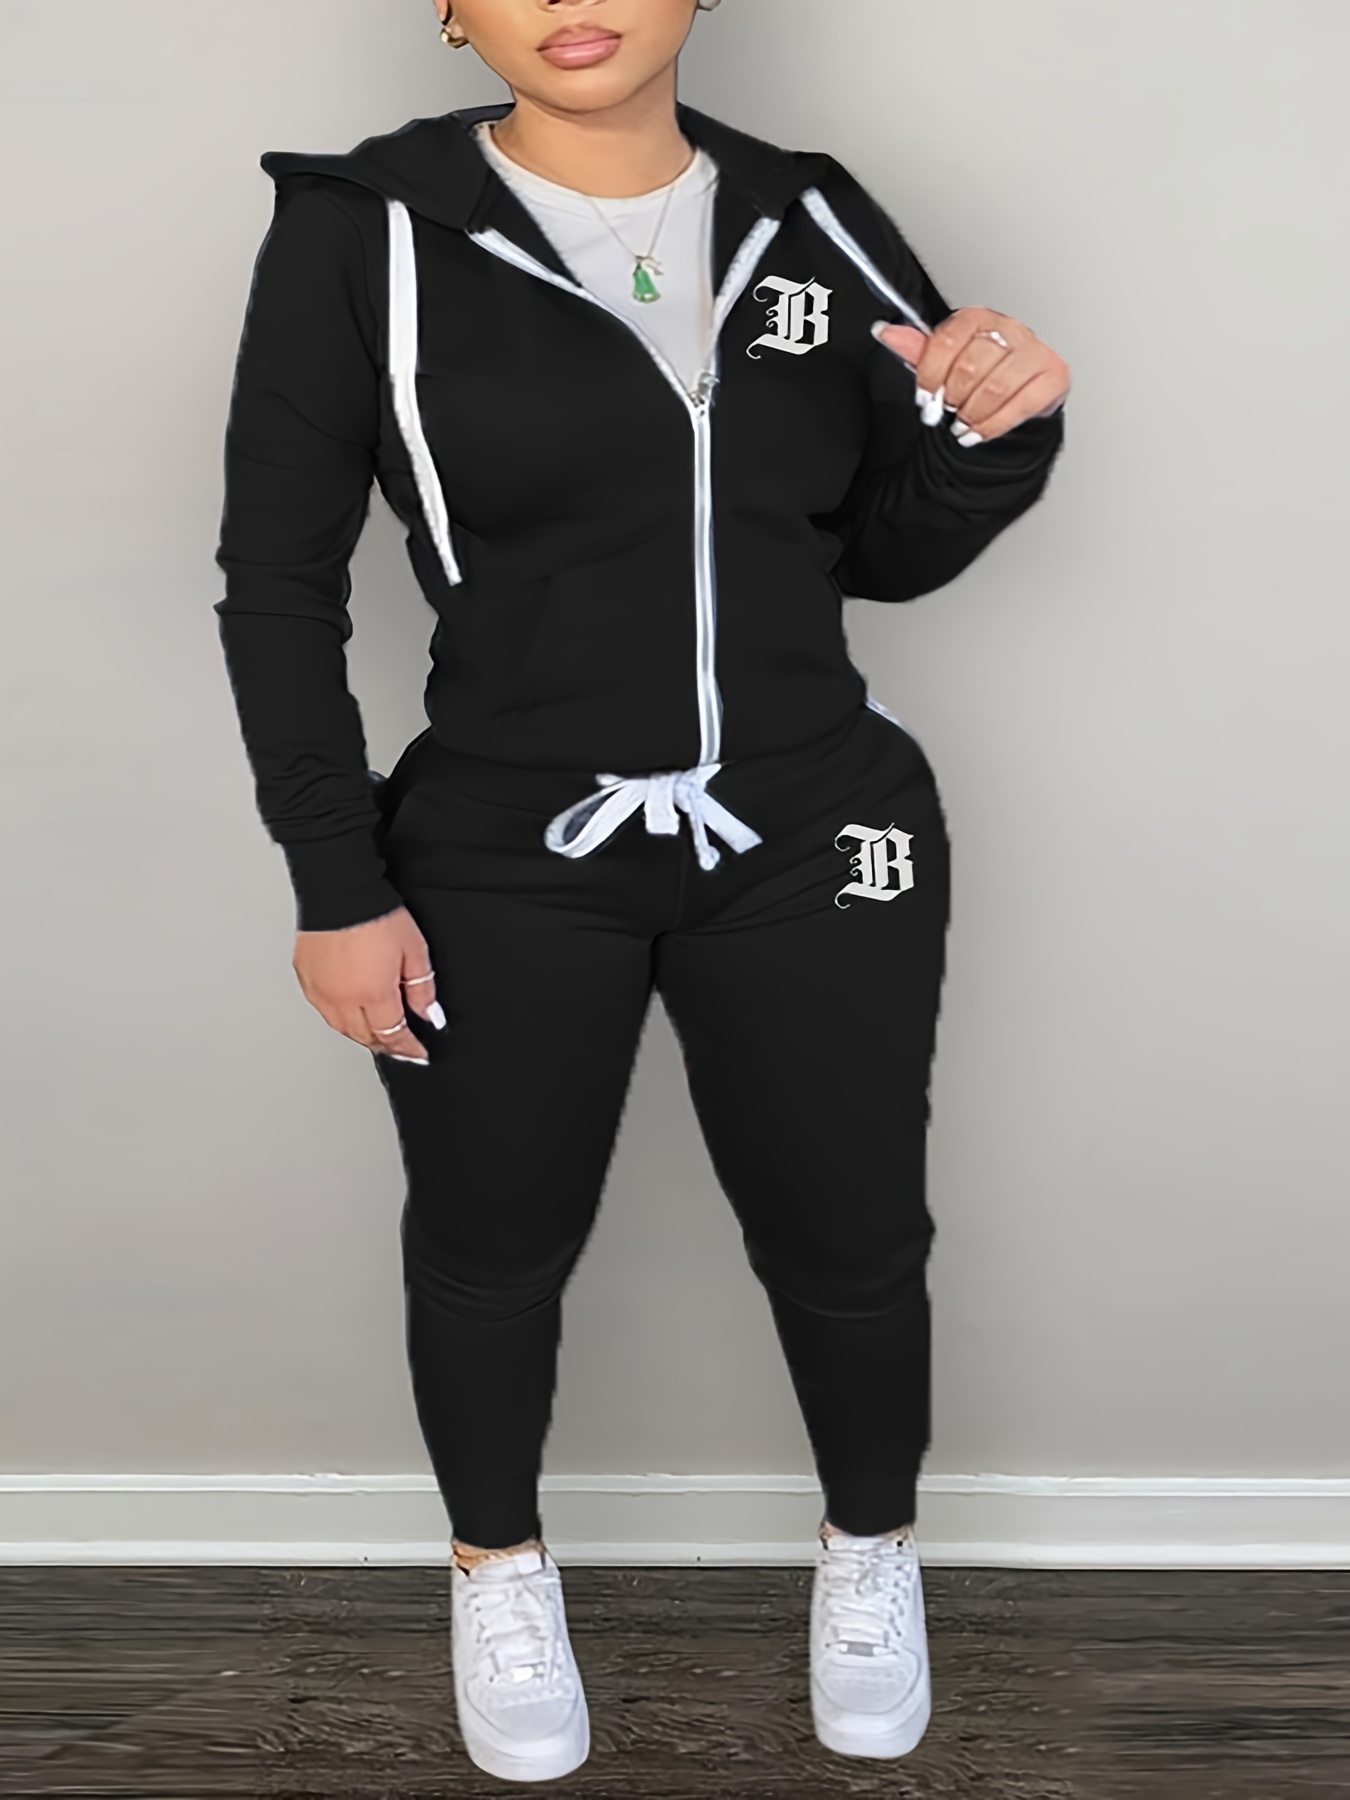 Summer Womens Short Jogging Suit Set Short Sleeve Jacket And Shorts, Plus  Size 2XL, Casual Black And White Sportswear For Running And Joggers 4939  From Sell_clothing, $18.7